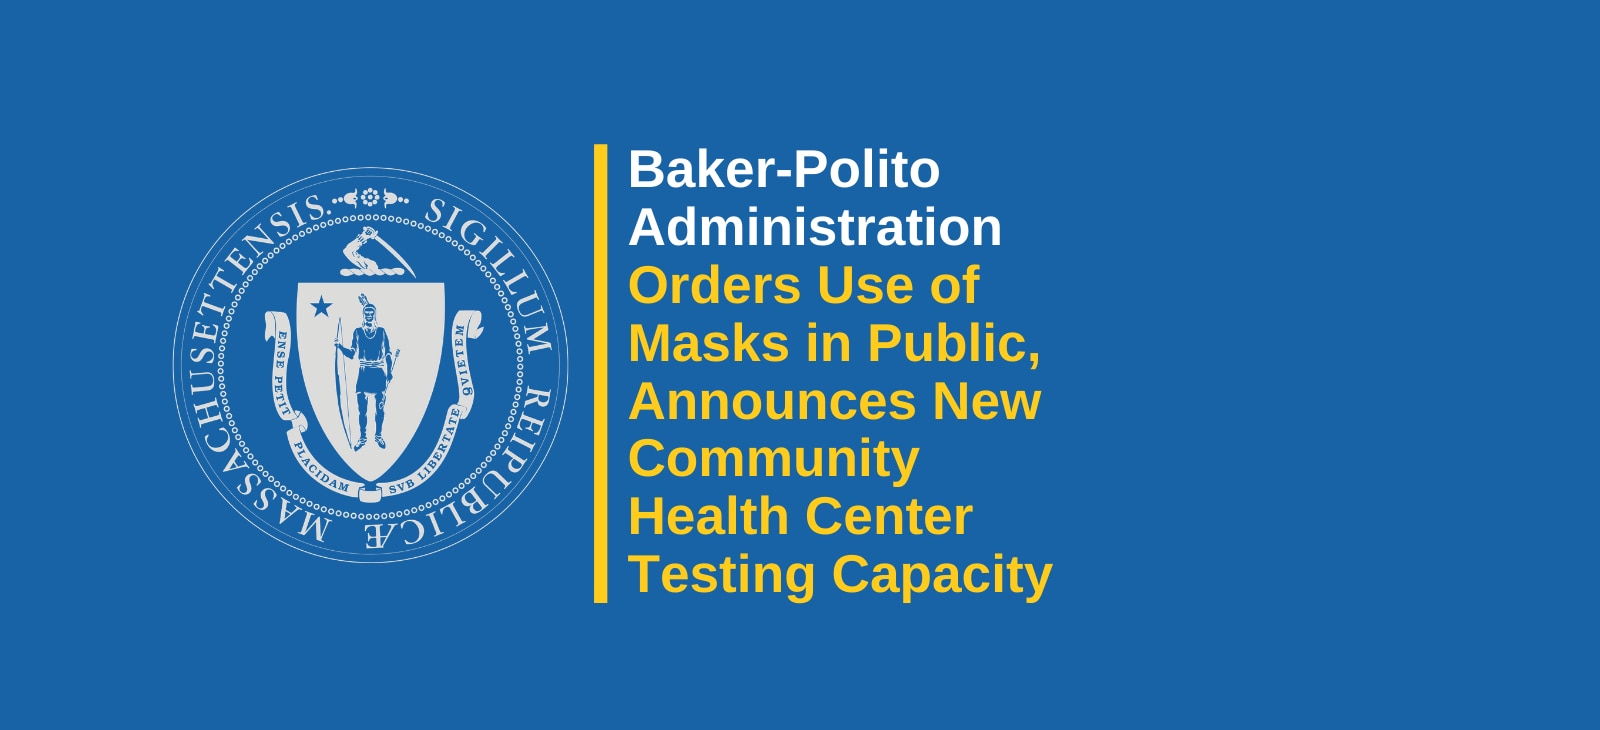 Baker-Polito Administration Orders Use of Mask or Face Covering in Public, Announces Increased Community Health Center COVID-19 Testing Capacity